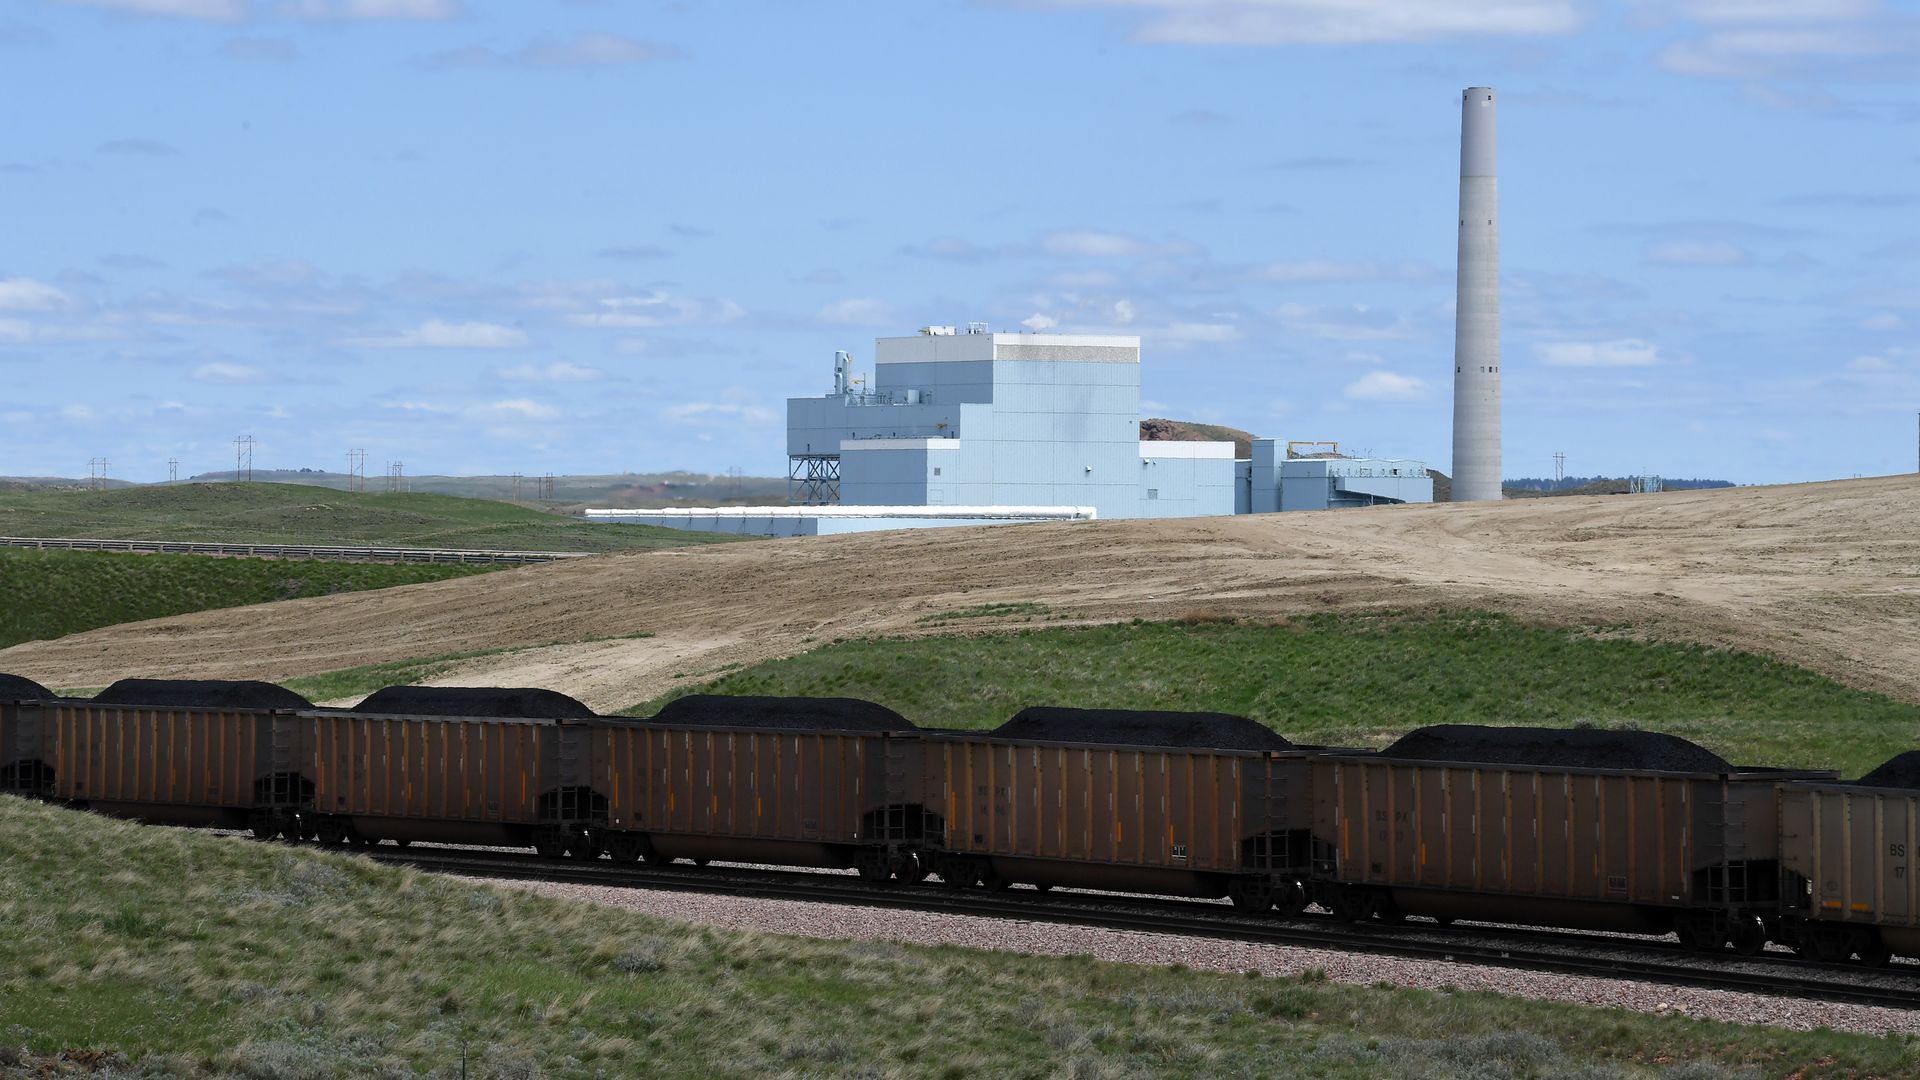 A coal train in front of a coal fired power plant.